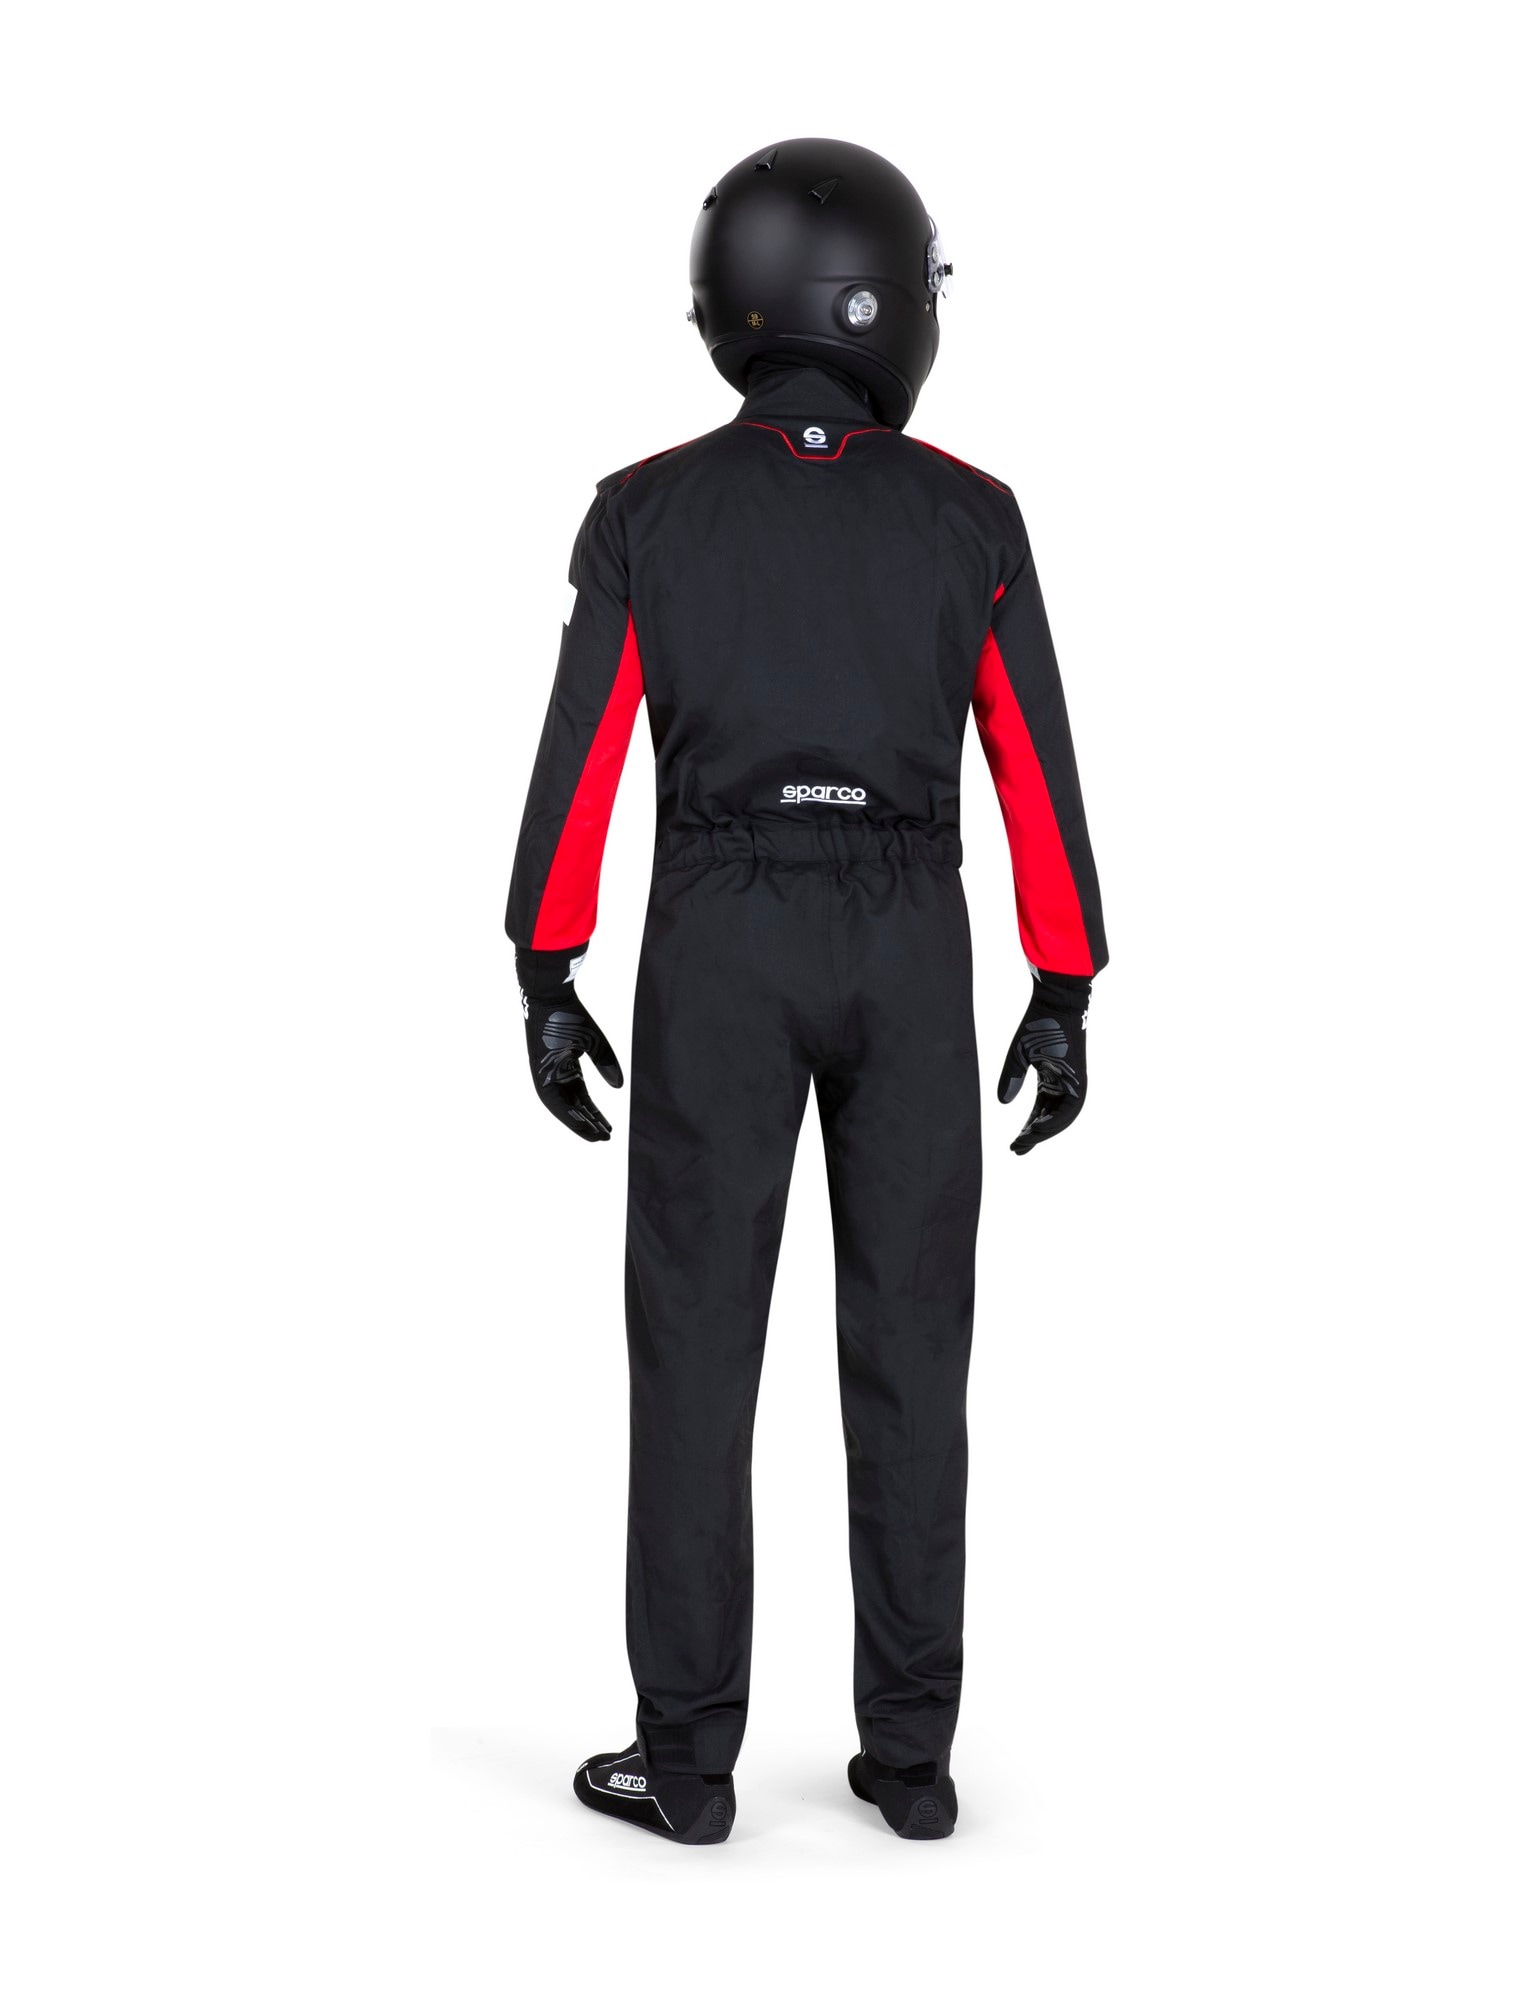 Racing Suit Sparco One SFI Black/Red